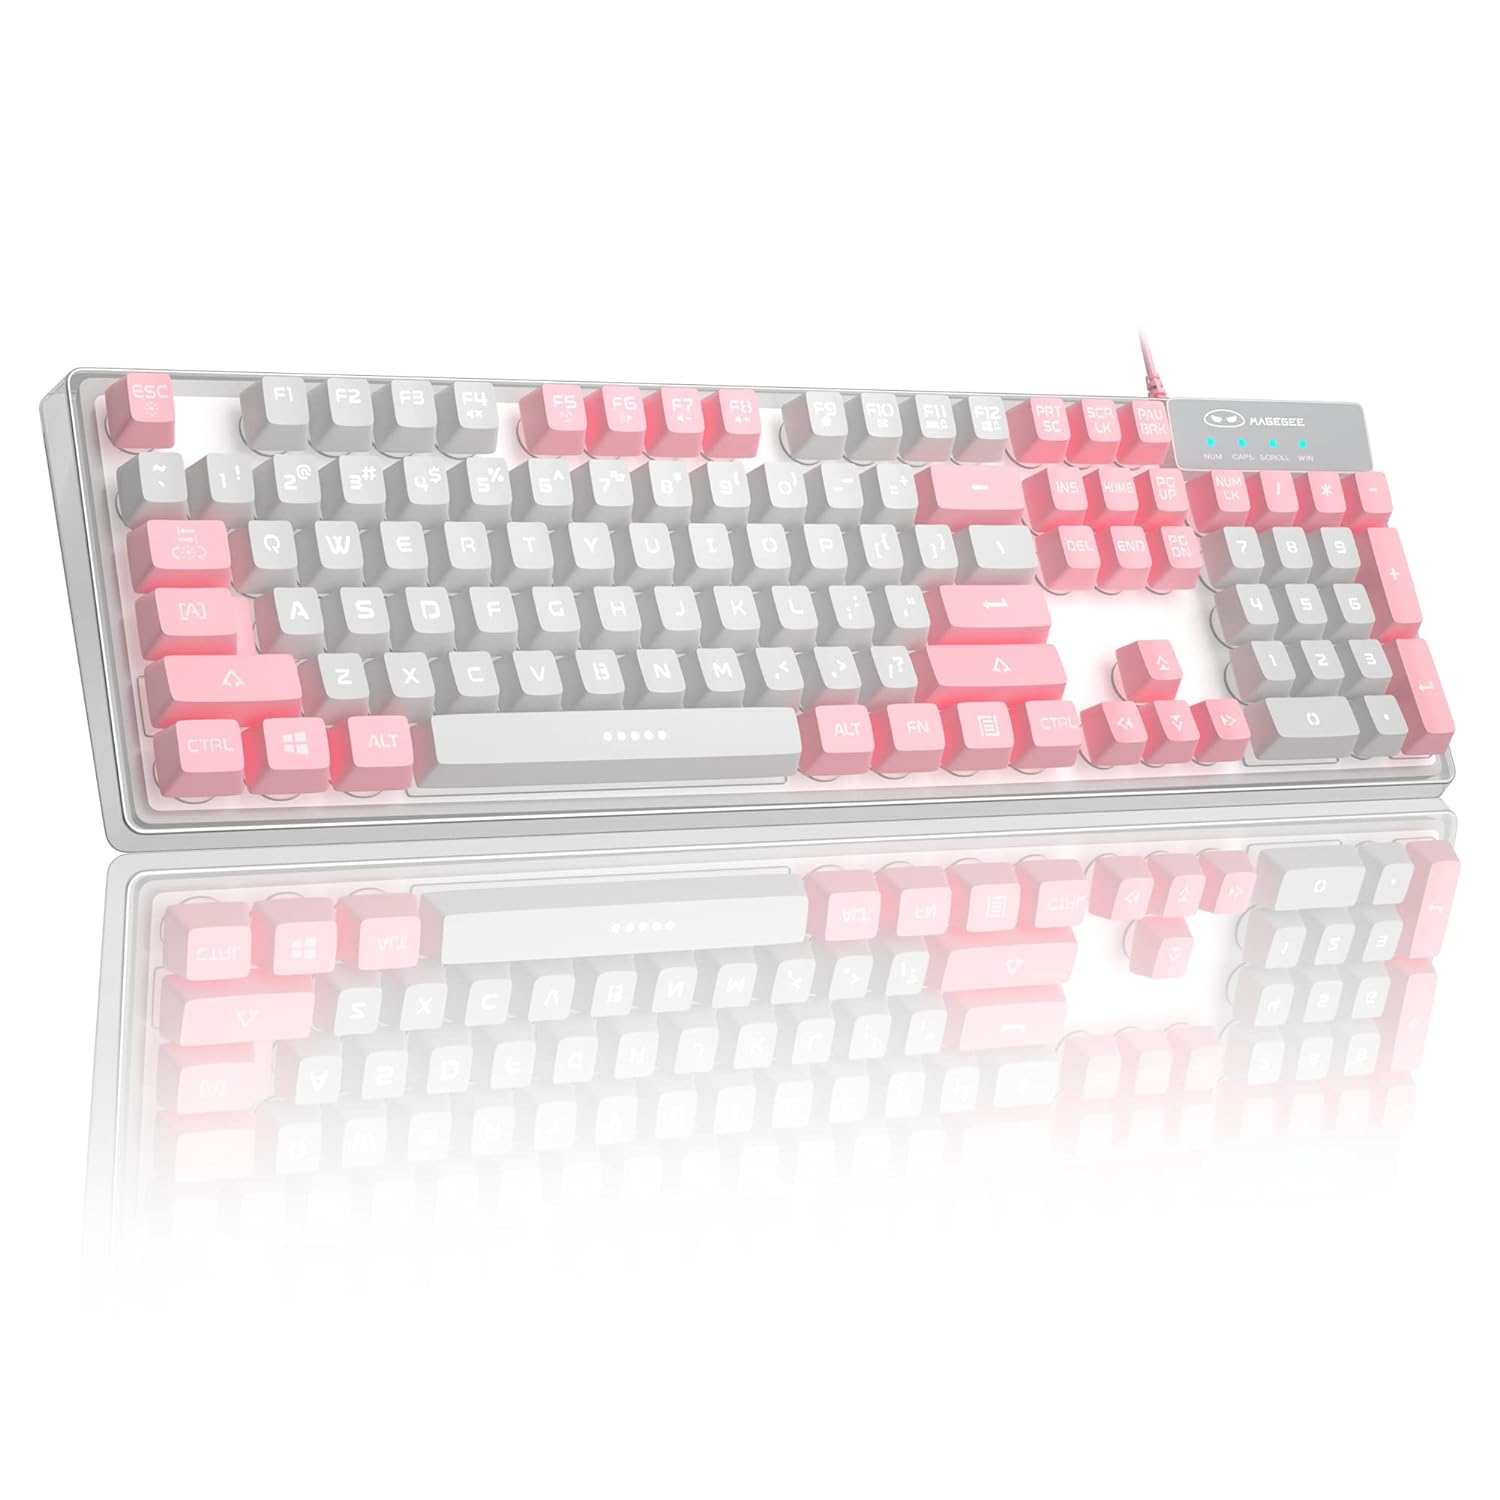 Gaming Keyboard, 7 Colors Backlit Wired Gaming Keyboard with Clear Housing and Double-Shot Keycaps, MageGee K1 Waterproof Ergonomic 104 Keys Light Up Keyboard for PC Desktop Laptop, Pink & White